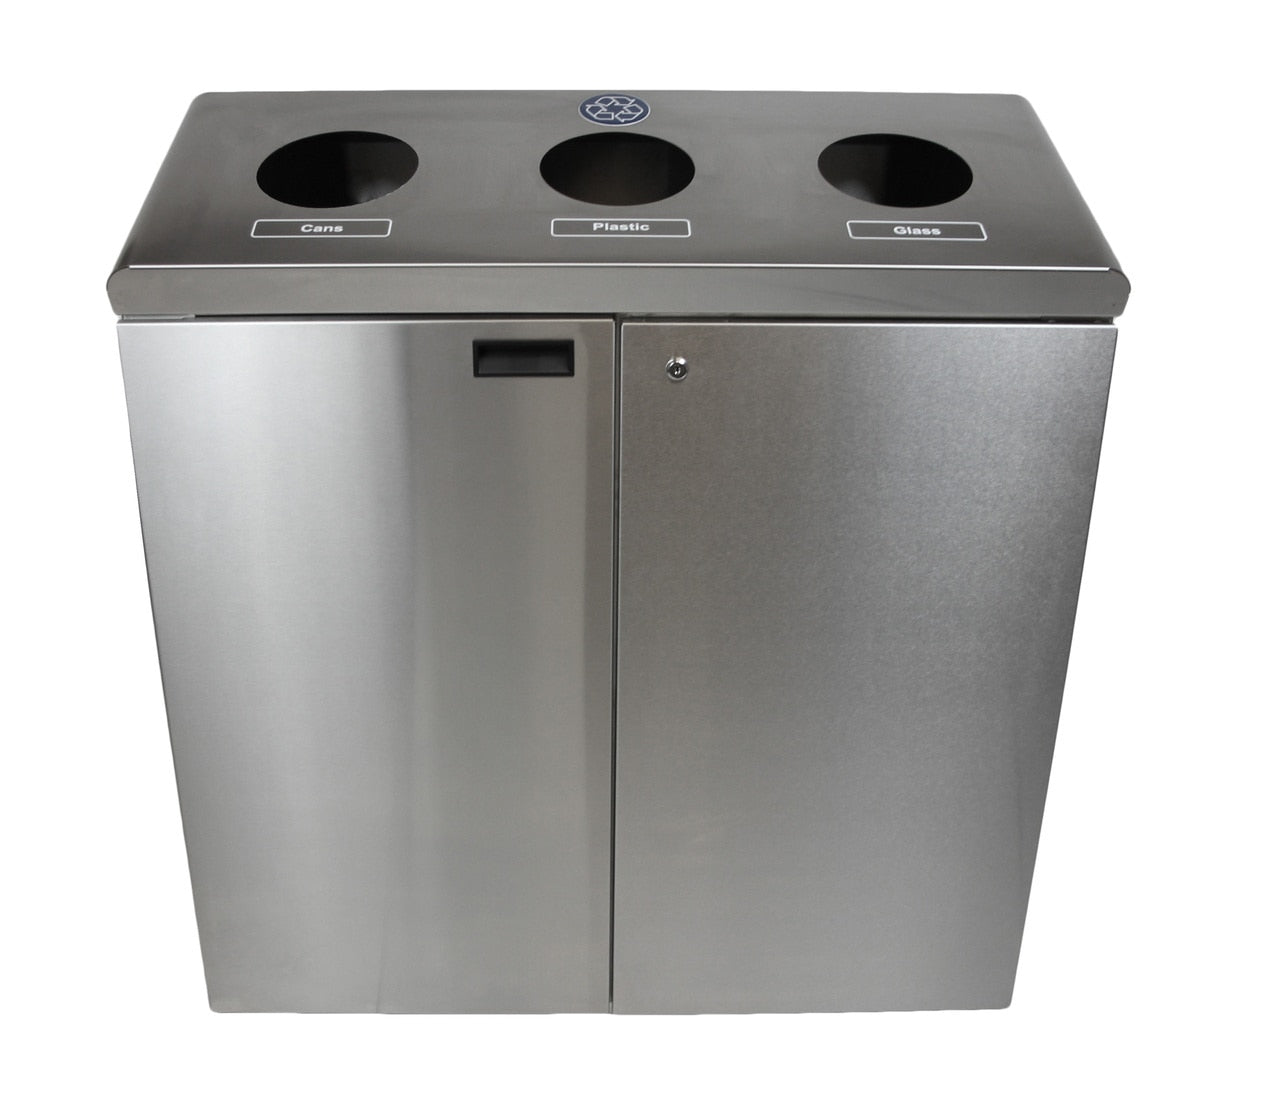 Frost 316-S - Floor Standing Recycling Station